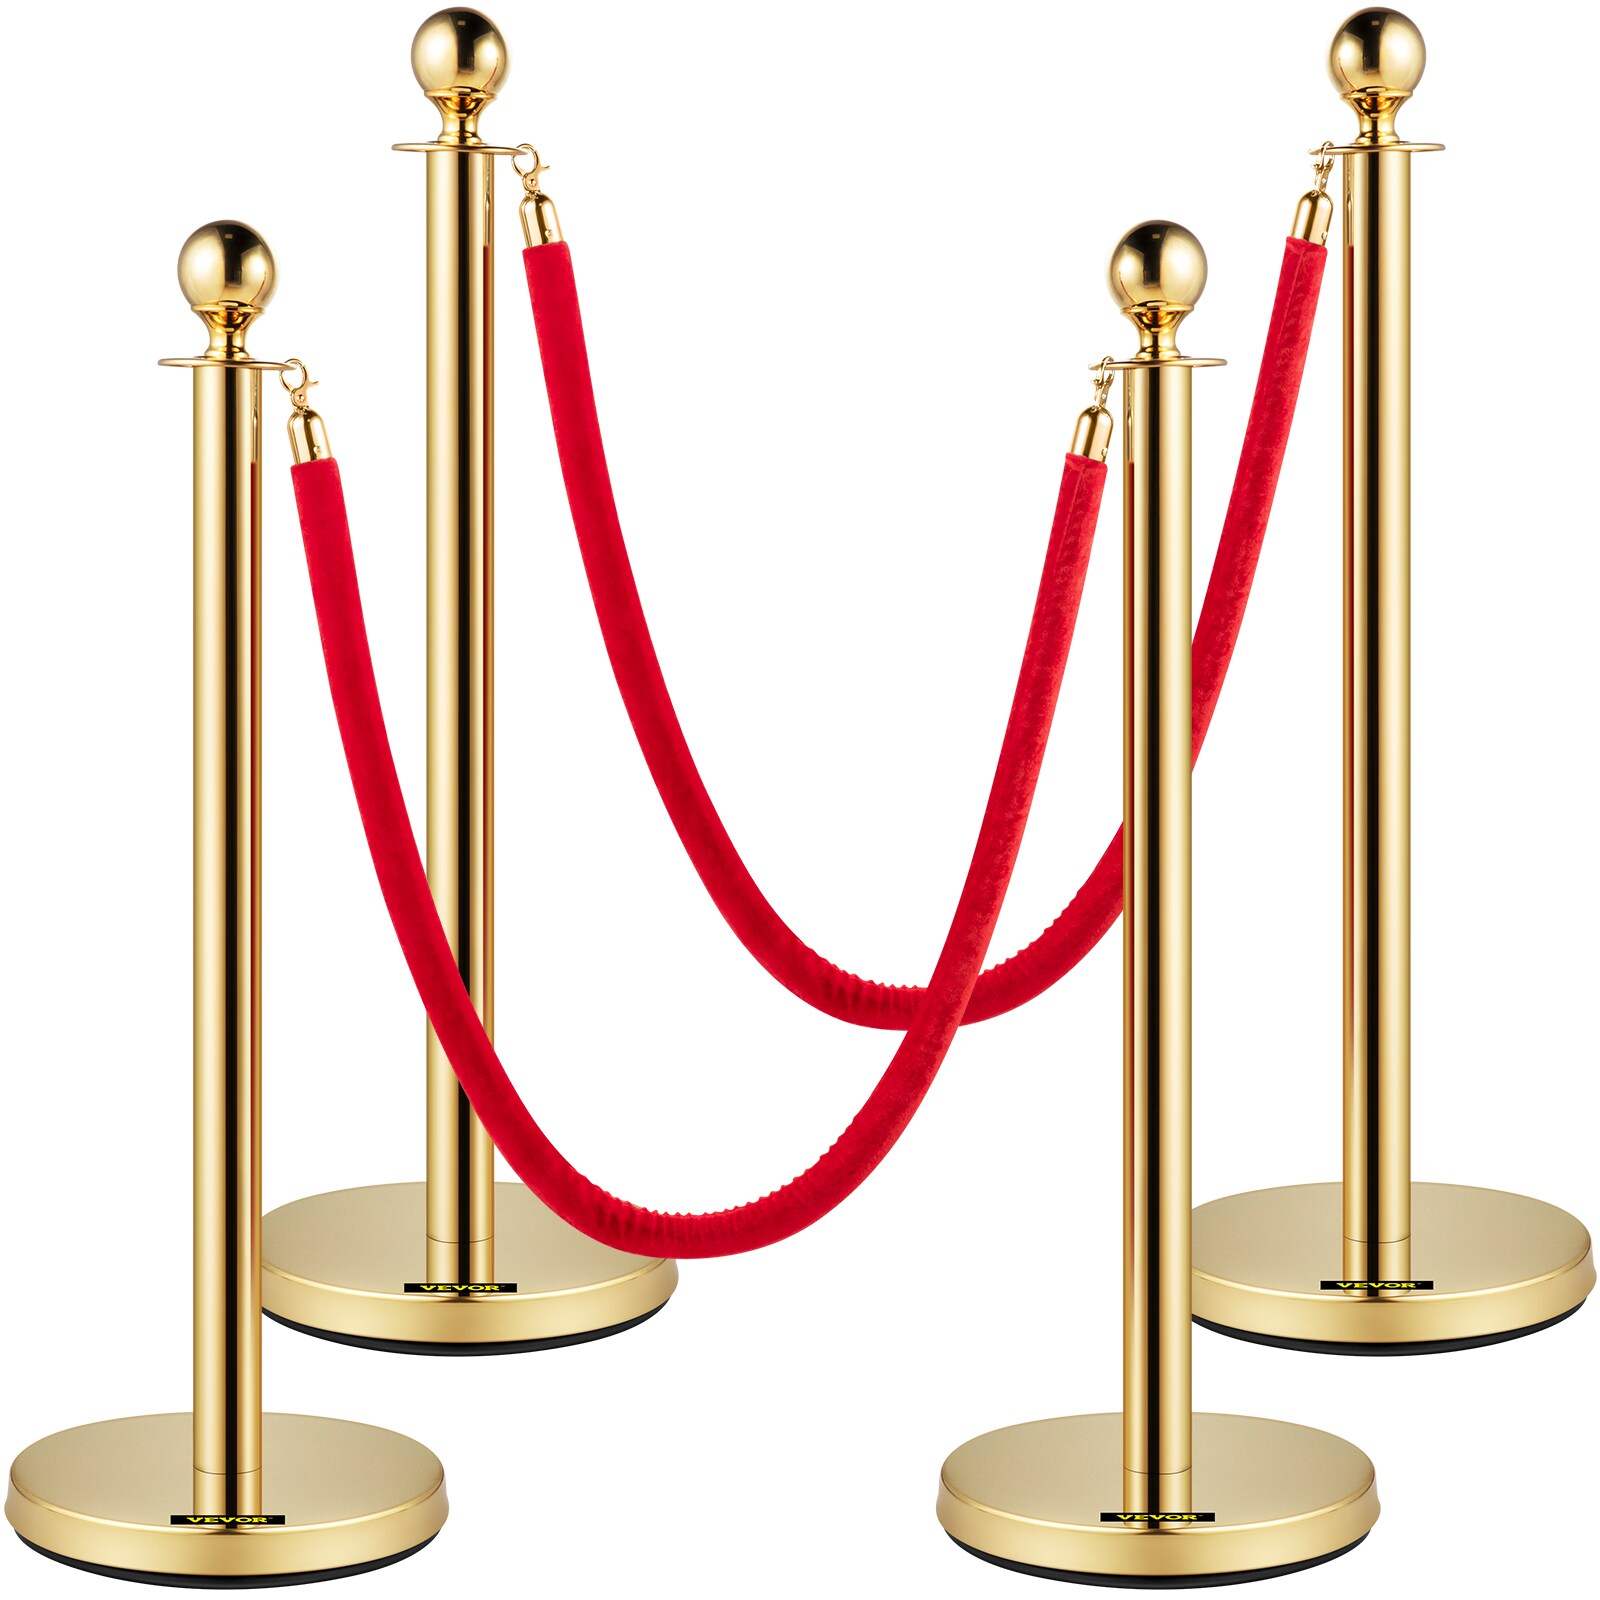 VEVOR Velvet Ropes and Posts, 5 ft/1.5 M Red Rope, Stainless Steel Gold Stanchion with Ball Top, Red Crowd Control Barrier Use